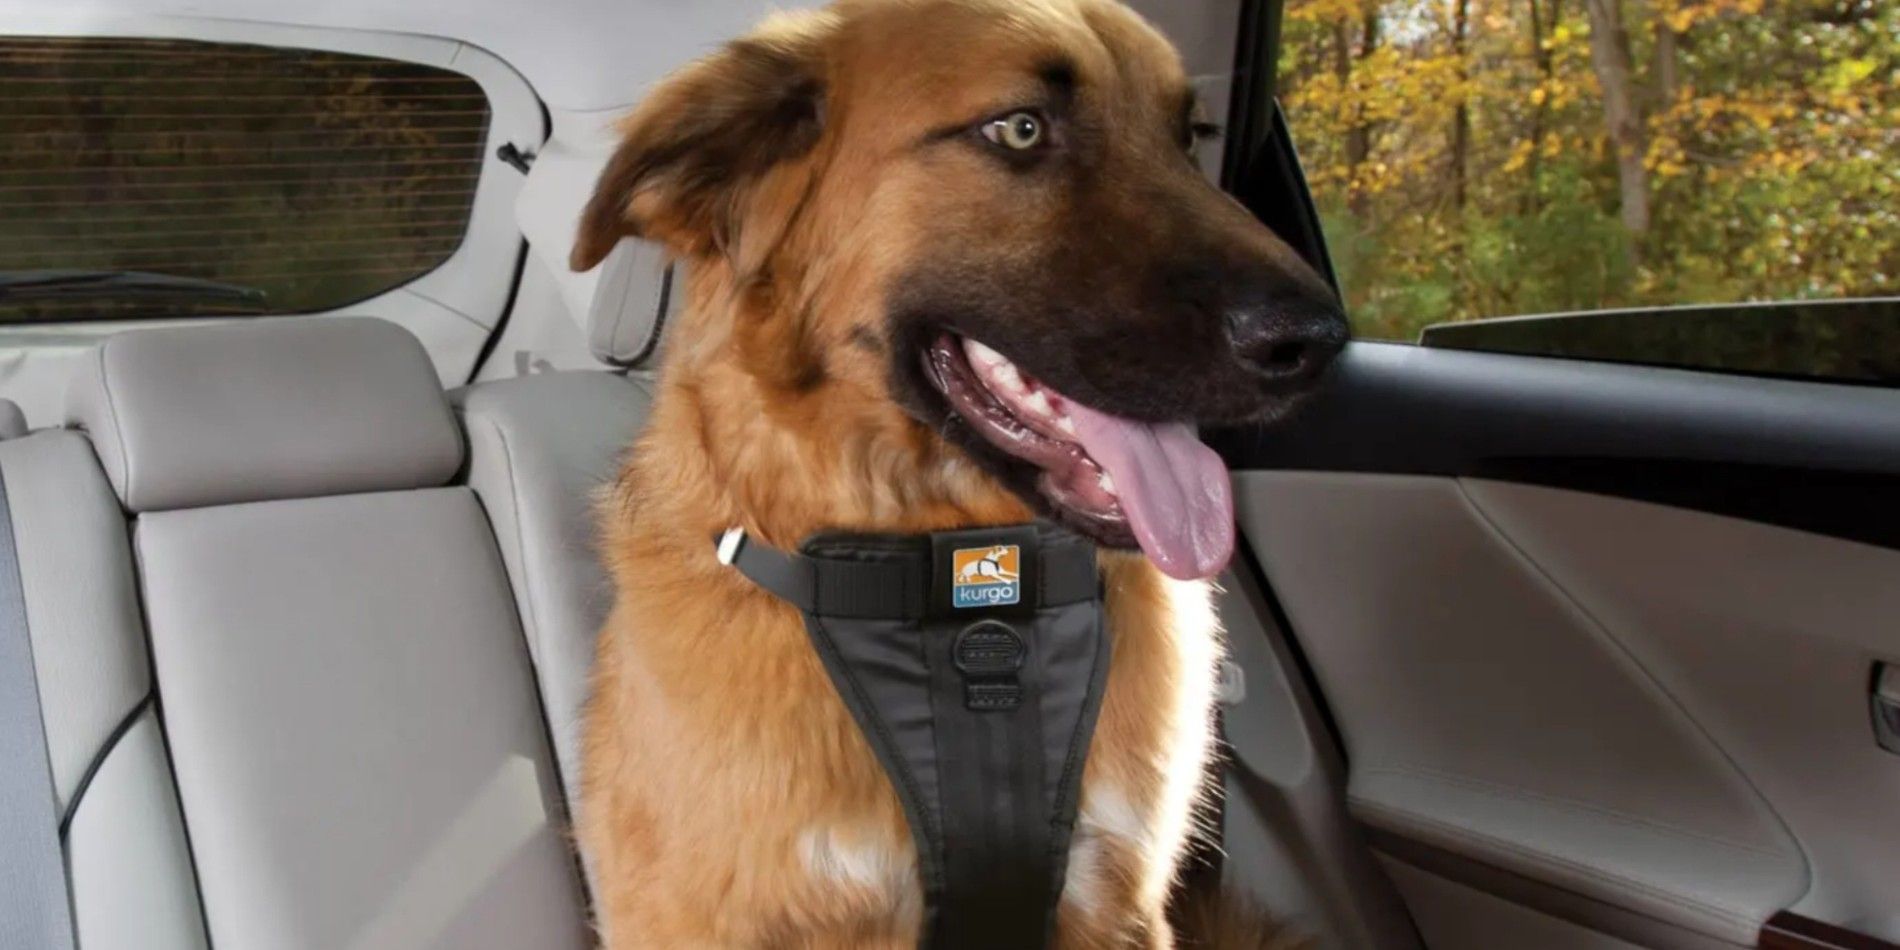 A Dog With A Petco Car Seat Dog Harness